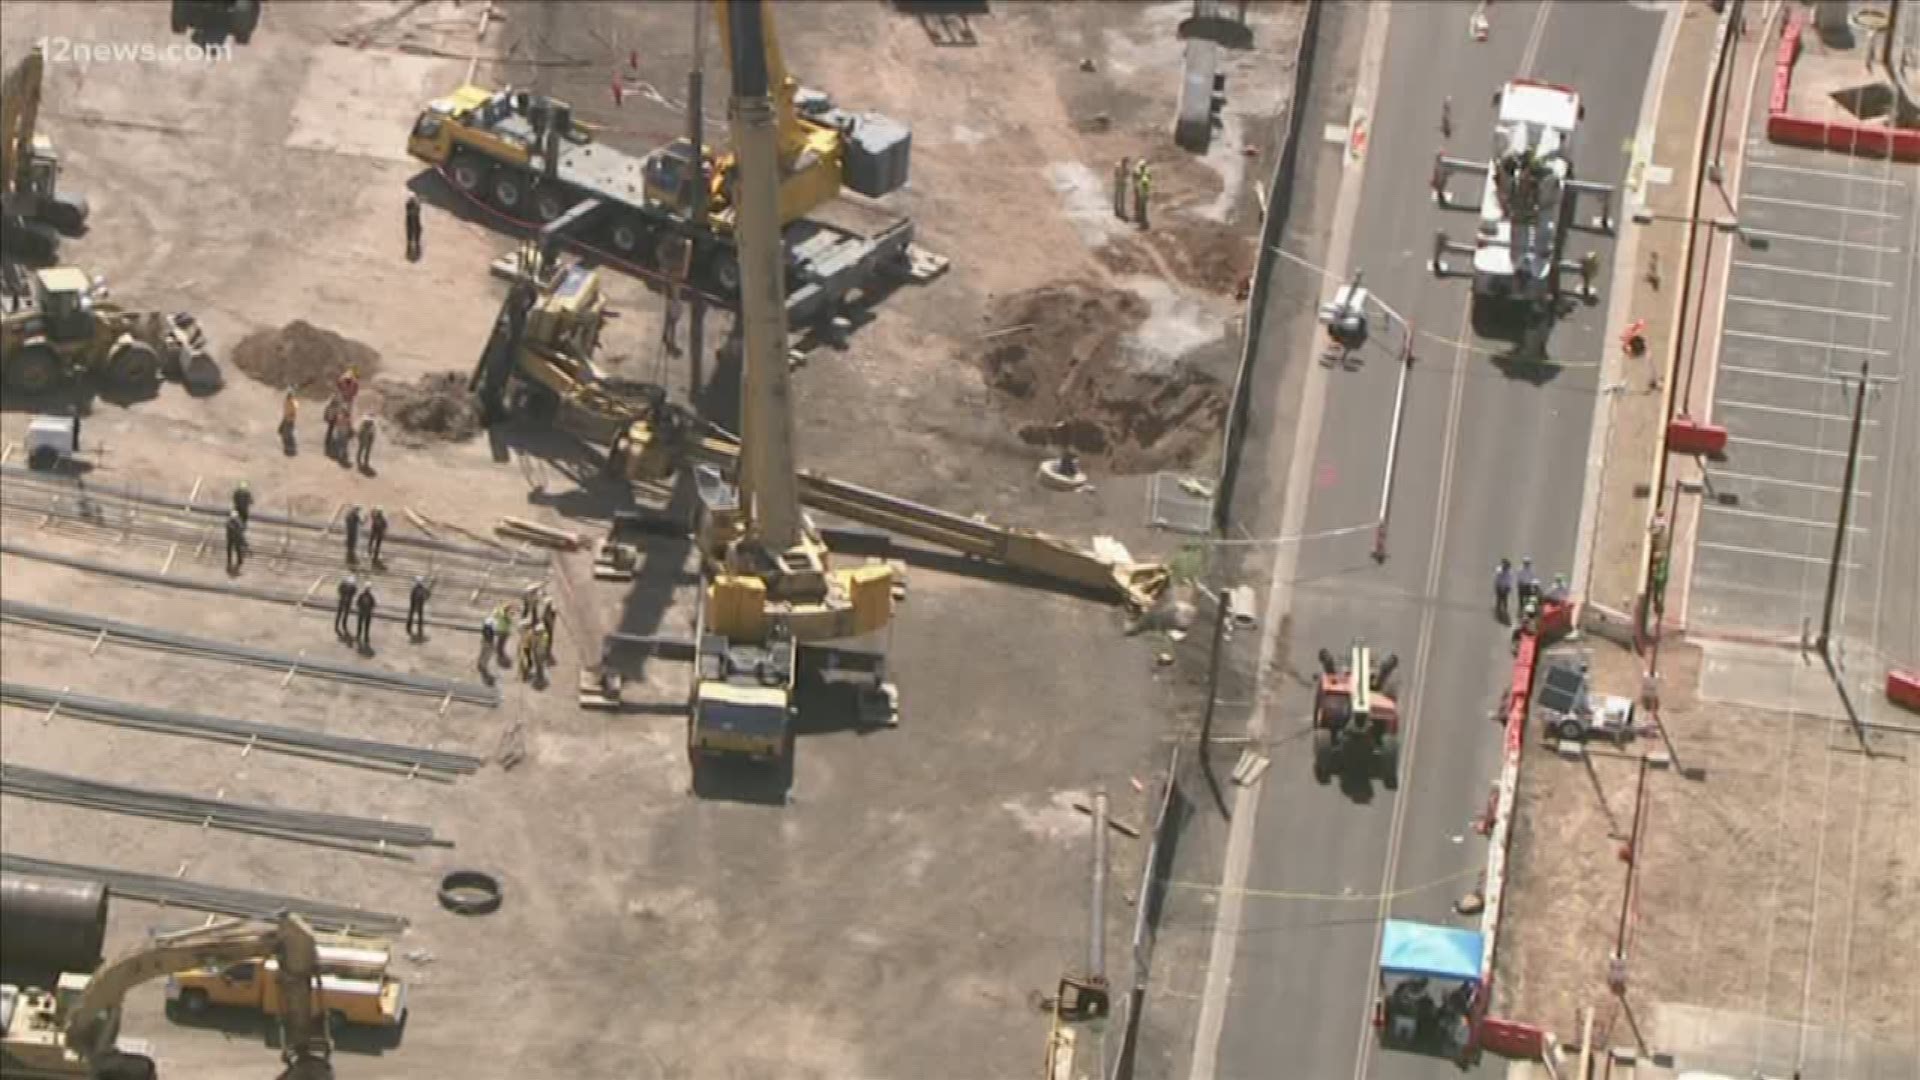 A toppled drill rig has been removed from a collapsed 32-foot hole near Phoenix Sky Harbor International Airport, but crews have yet to recover the body of a missing construction worker.